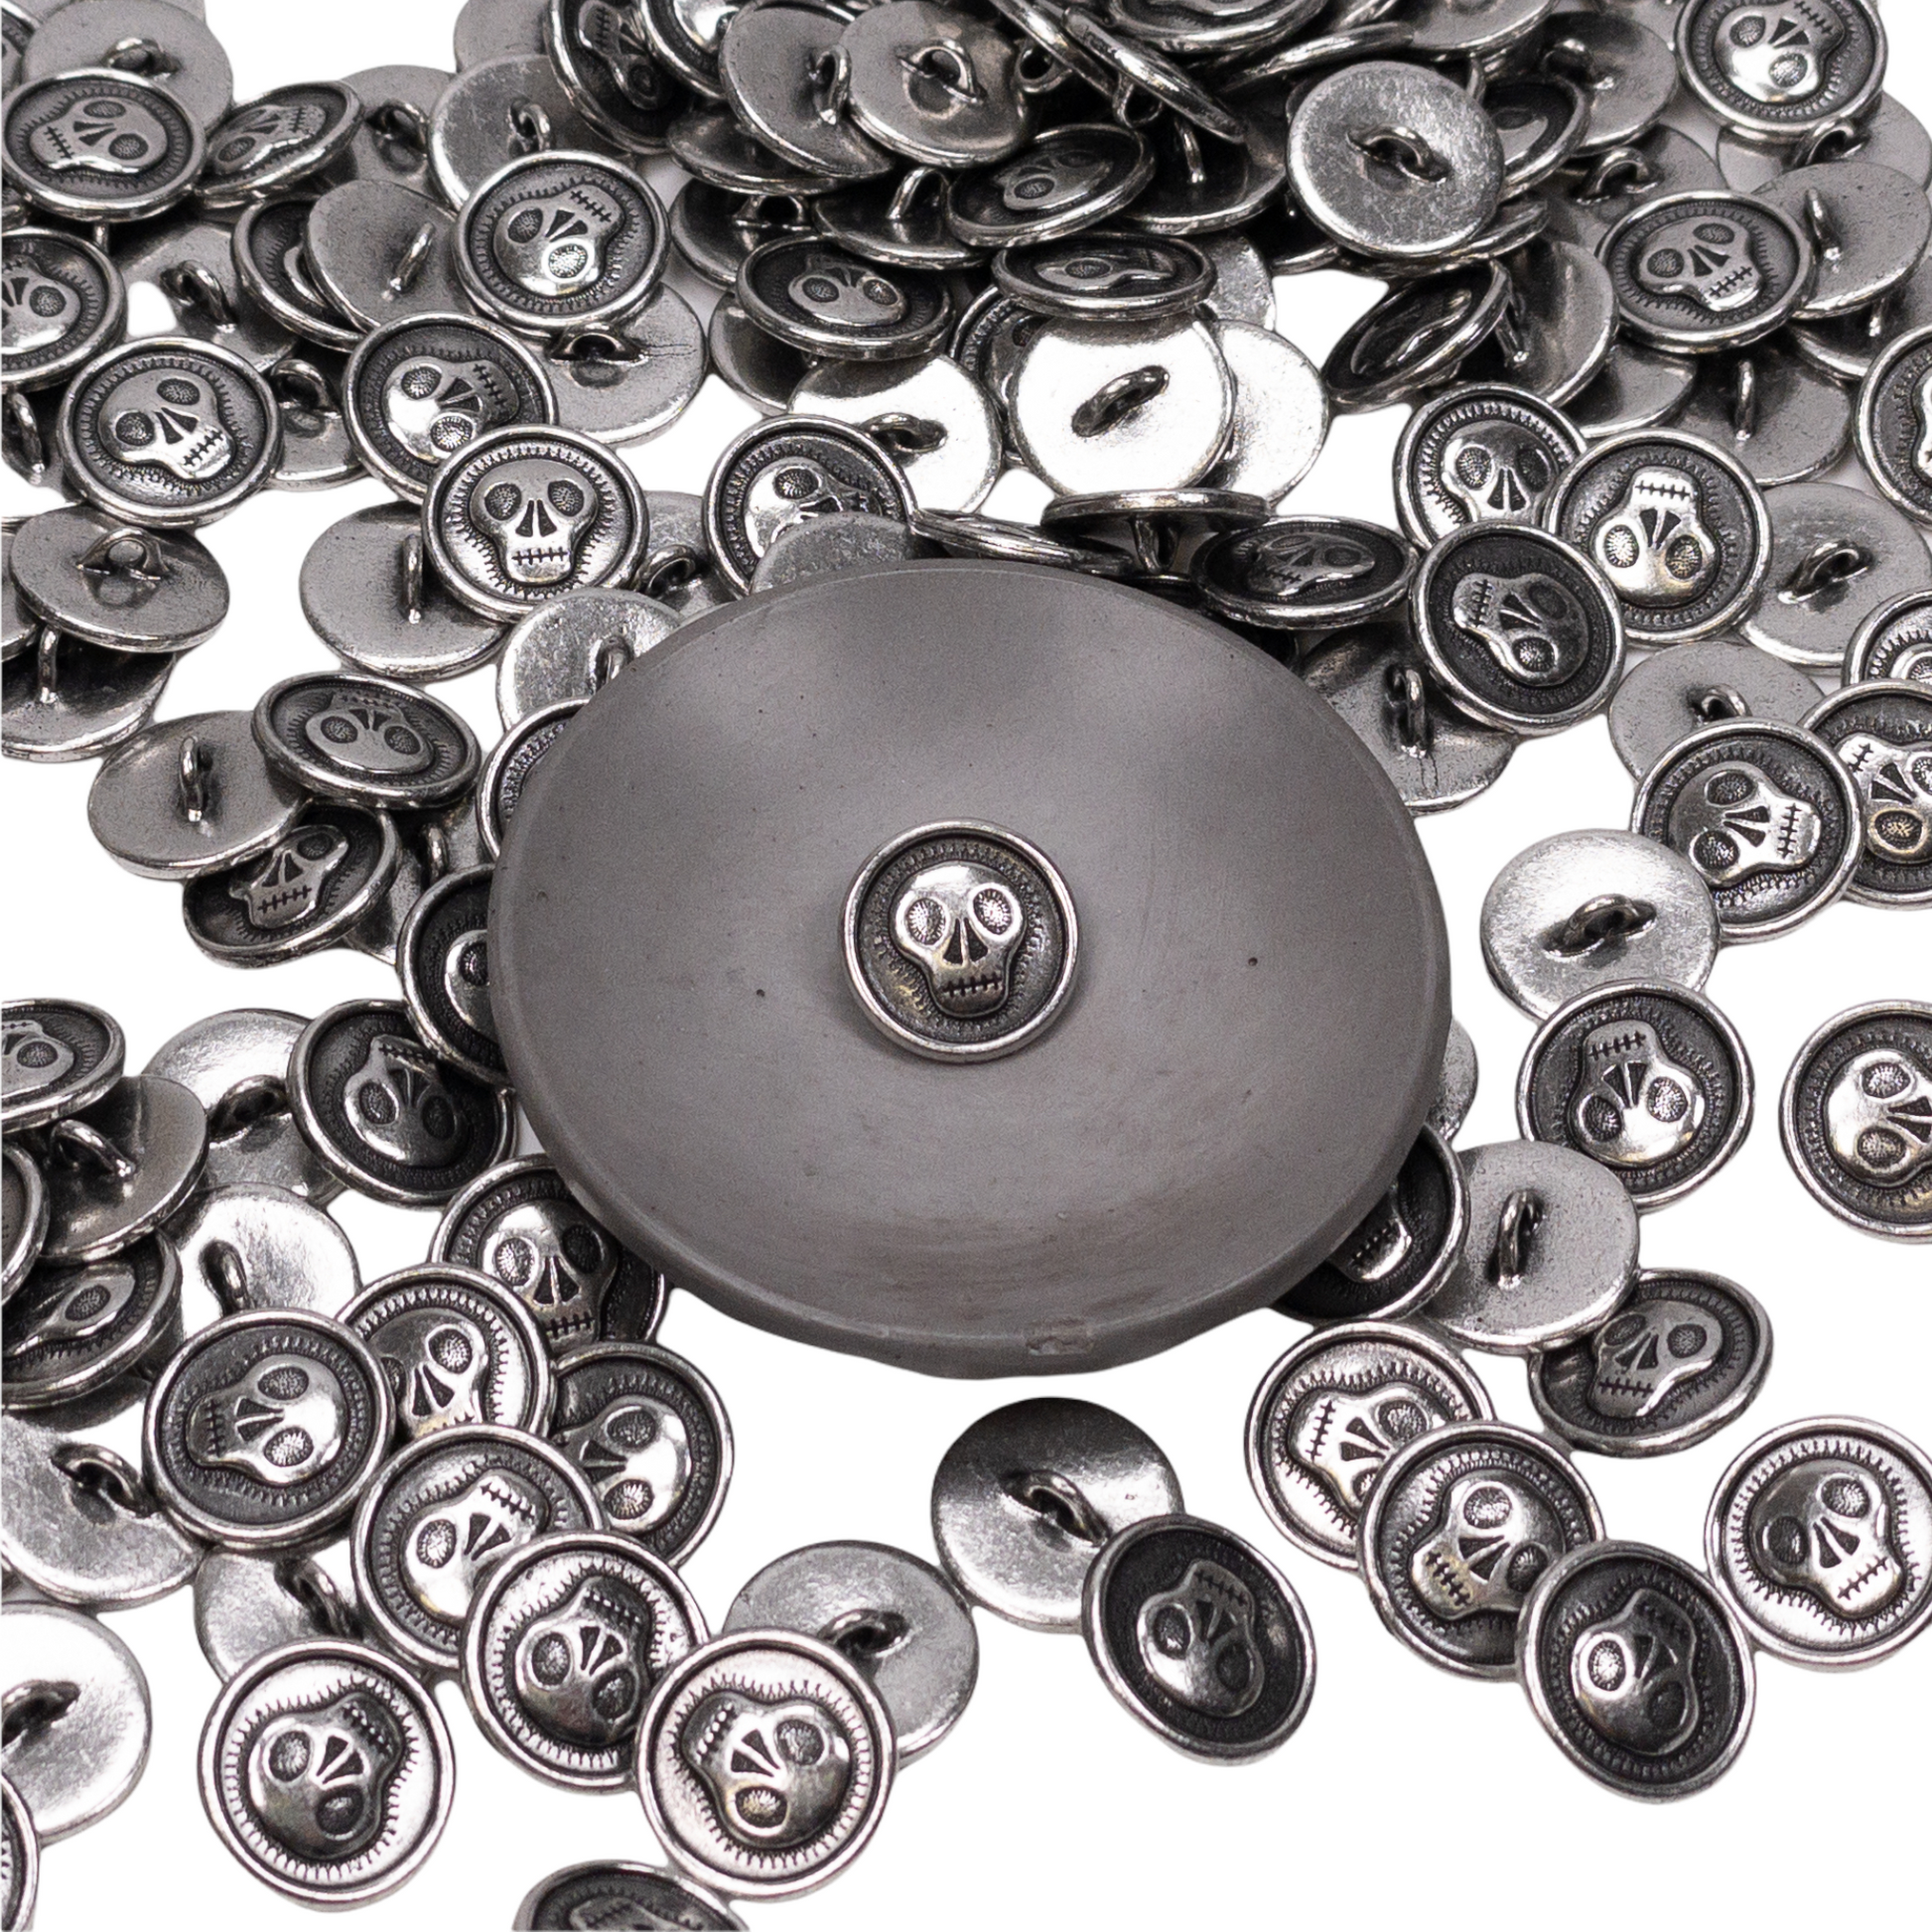 Skully Button (Antique Pewter) - 1 pc.